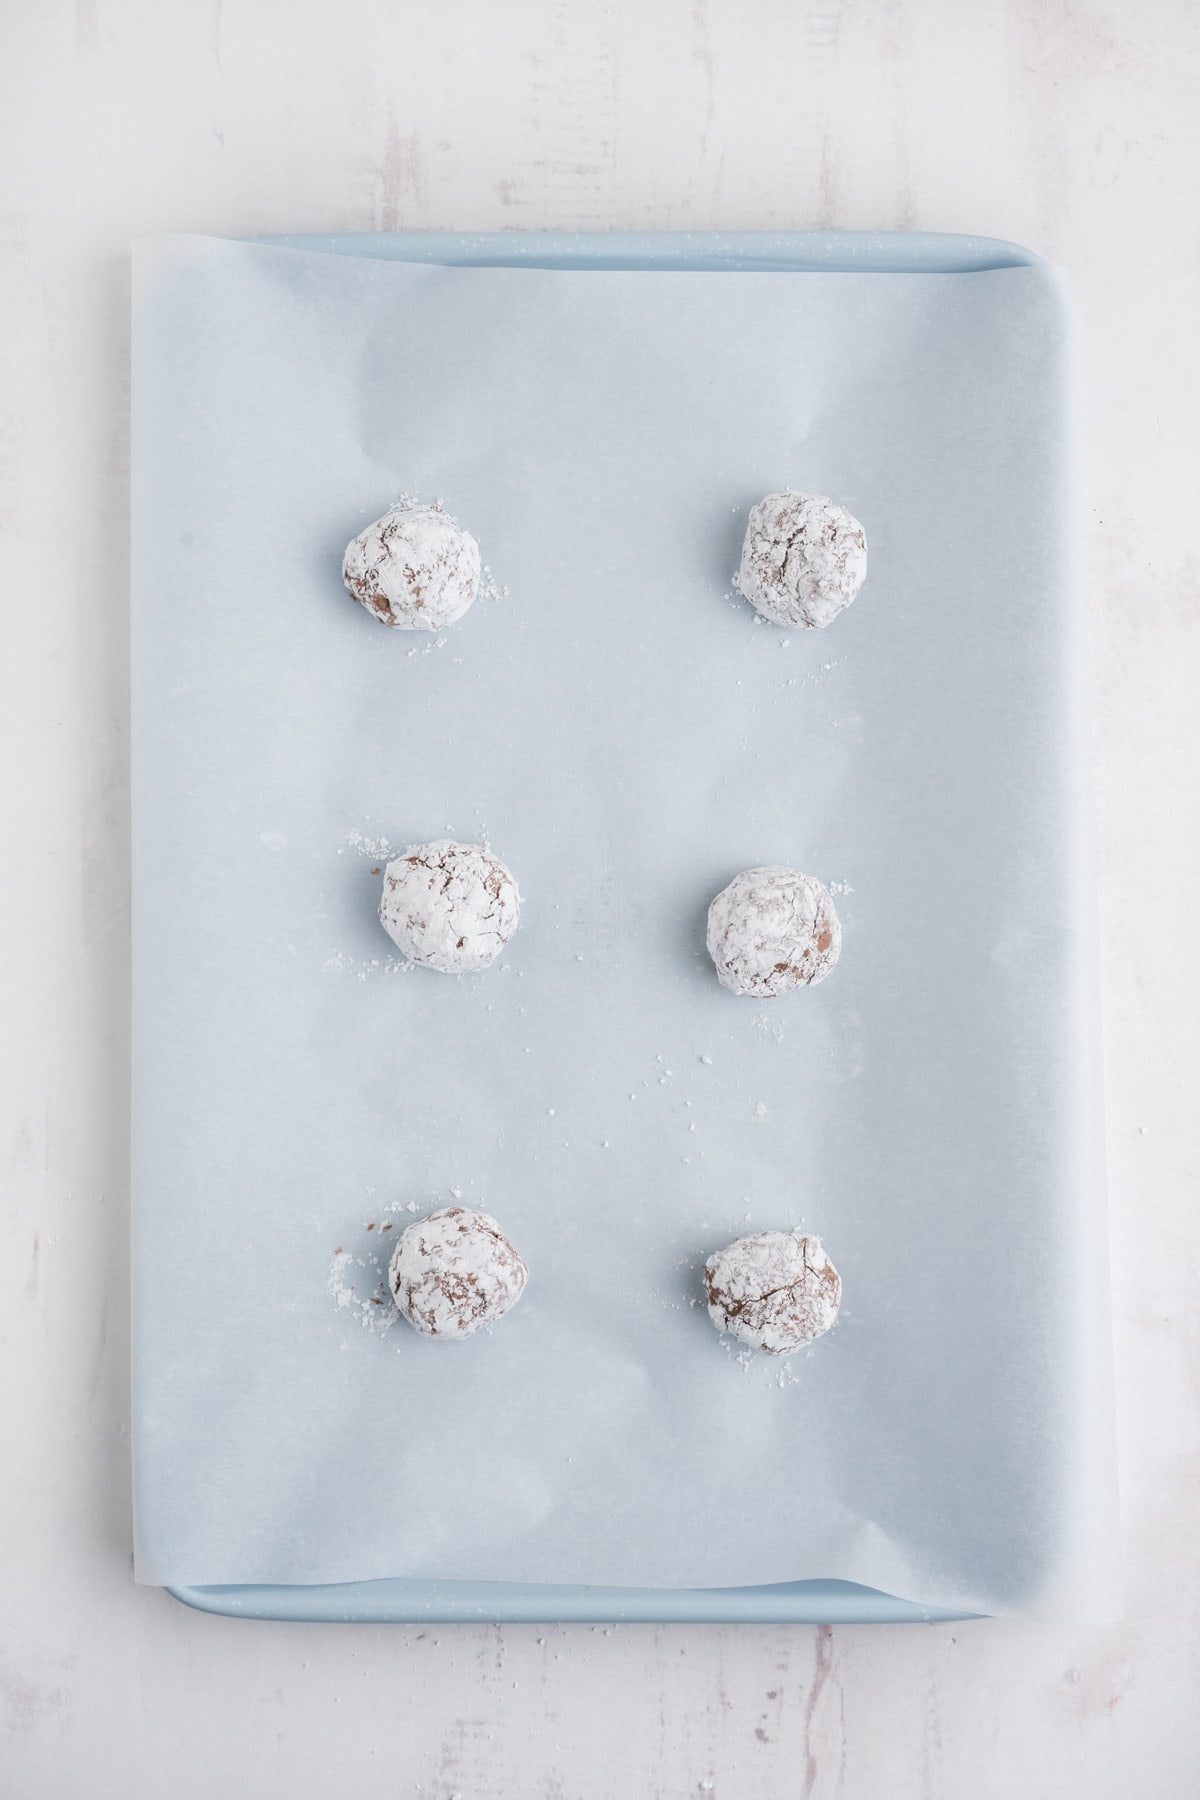 Cookie dough balls covered ni powdered sugar and sitting on a parchment paper covered cookie sheet. 